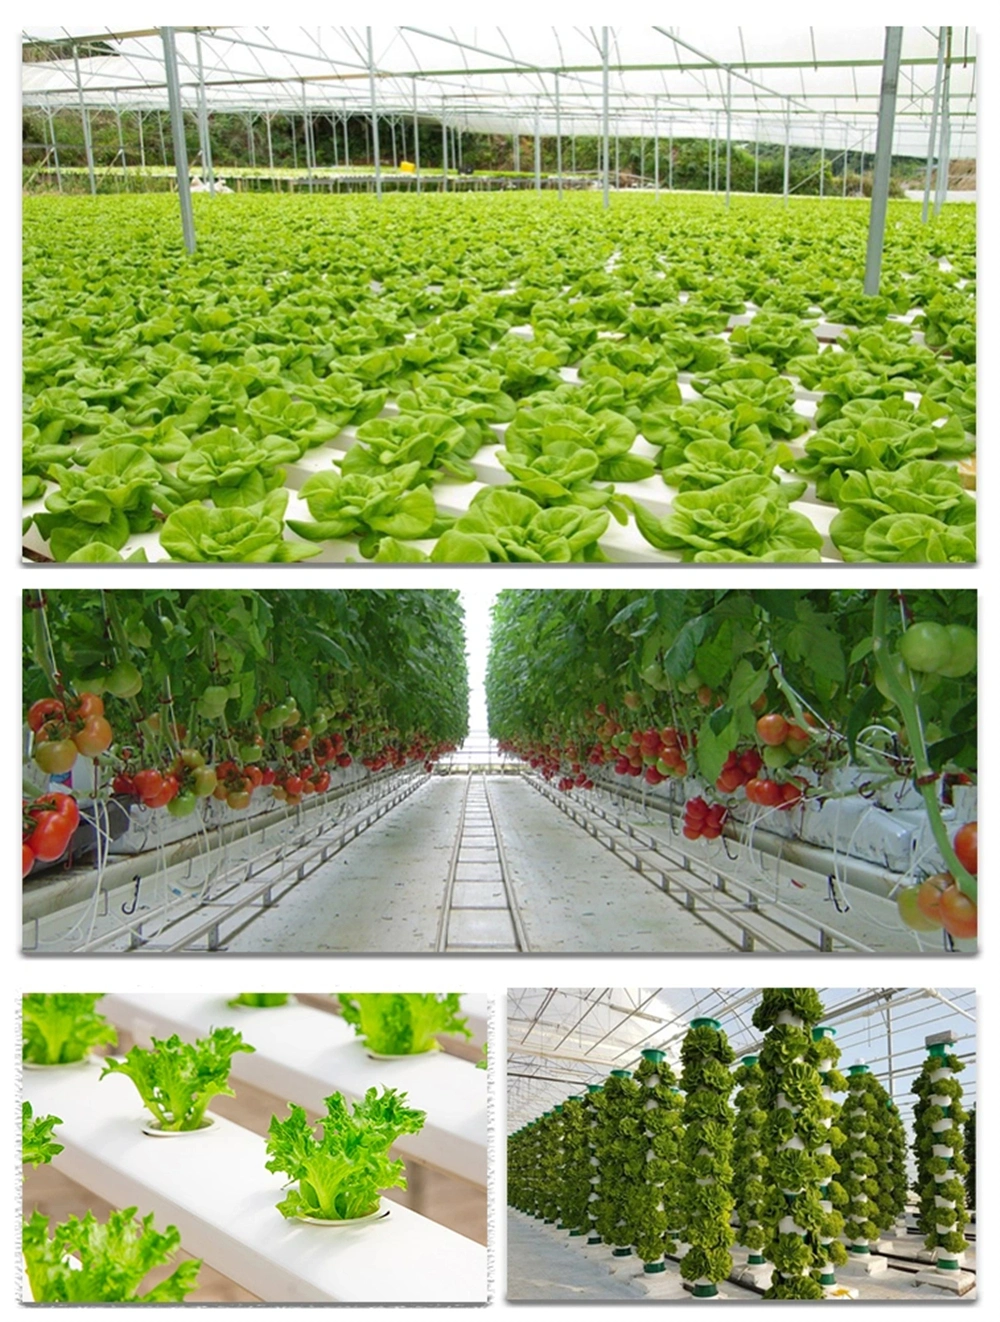 Multi-Span Film Commercial/Agriculture Greenhouse with Heating/Hydroponic System for Tomato/Salad/Cucumber/Flower/Lettuce